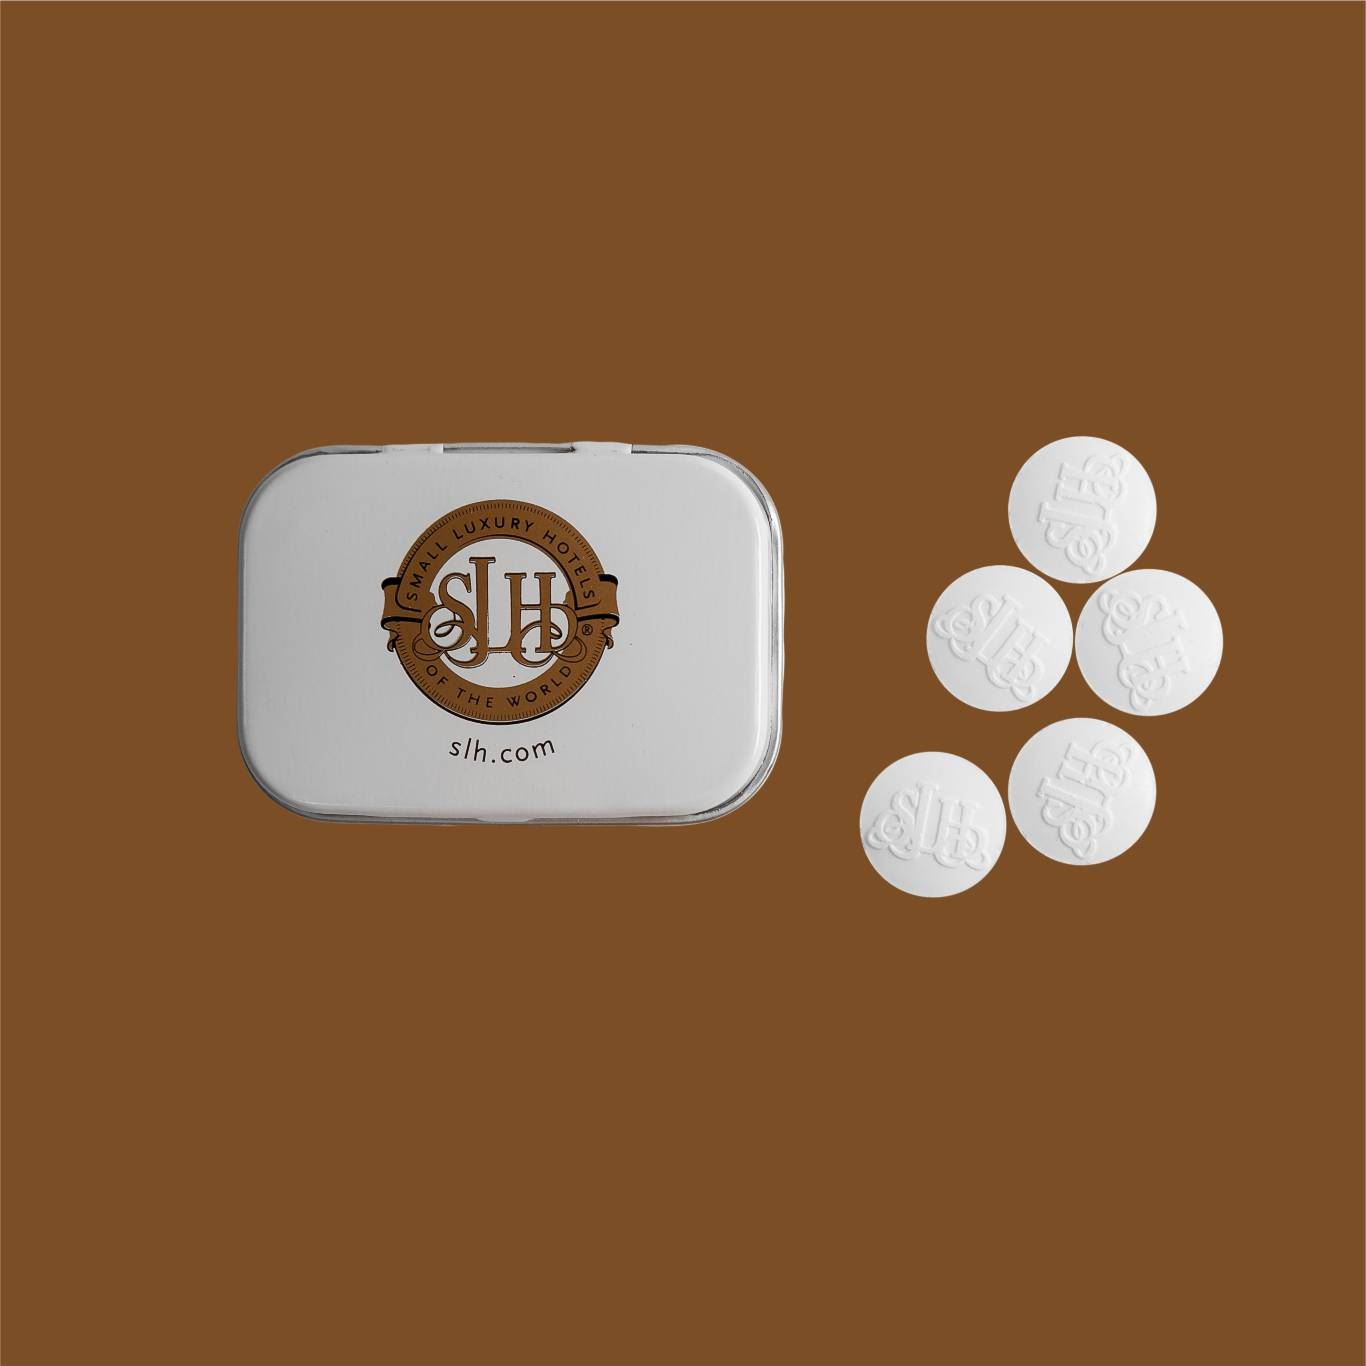 Imprinted Small Tins with Printed Mints